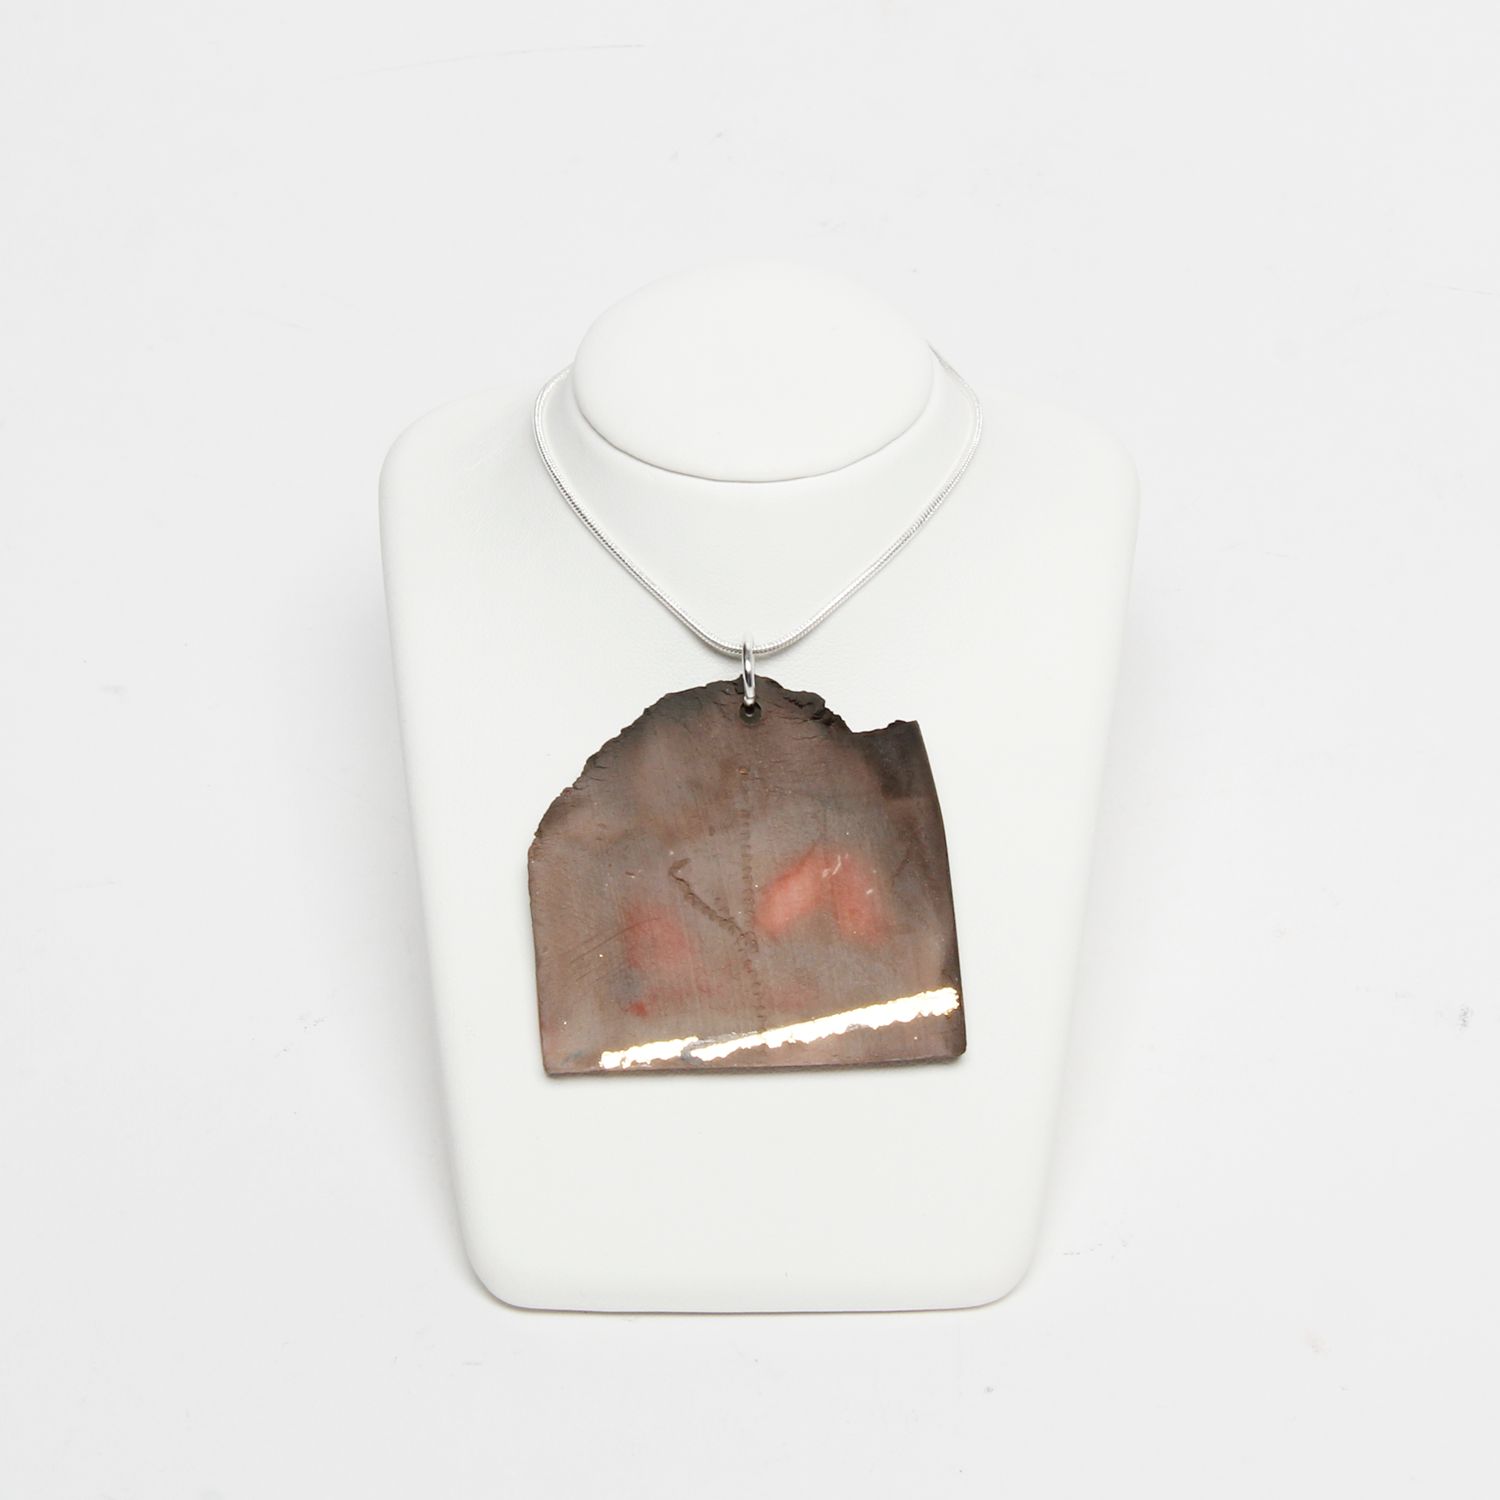 Susan Card: Necklace (Each sold separately) Product Image 3 of 8